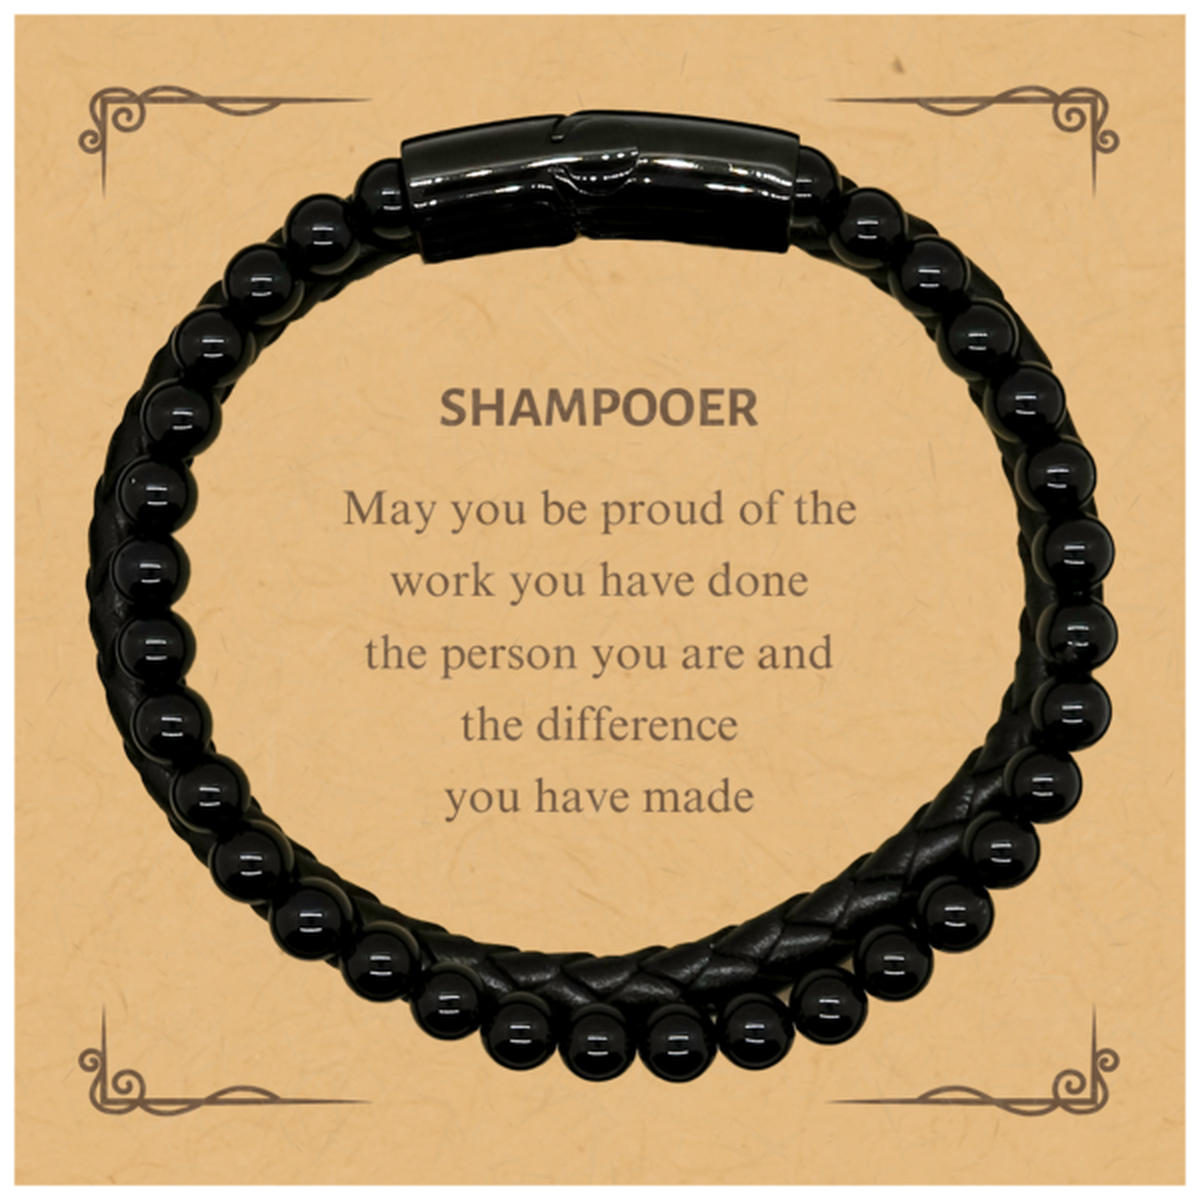 Shampooer May you be proud of the work you have done, Retirement Shampooer Stone Leather Bracelets for Colleague Appreciation Gifts Amazing for Shampooer